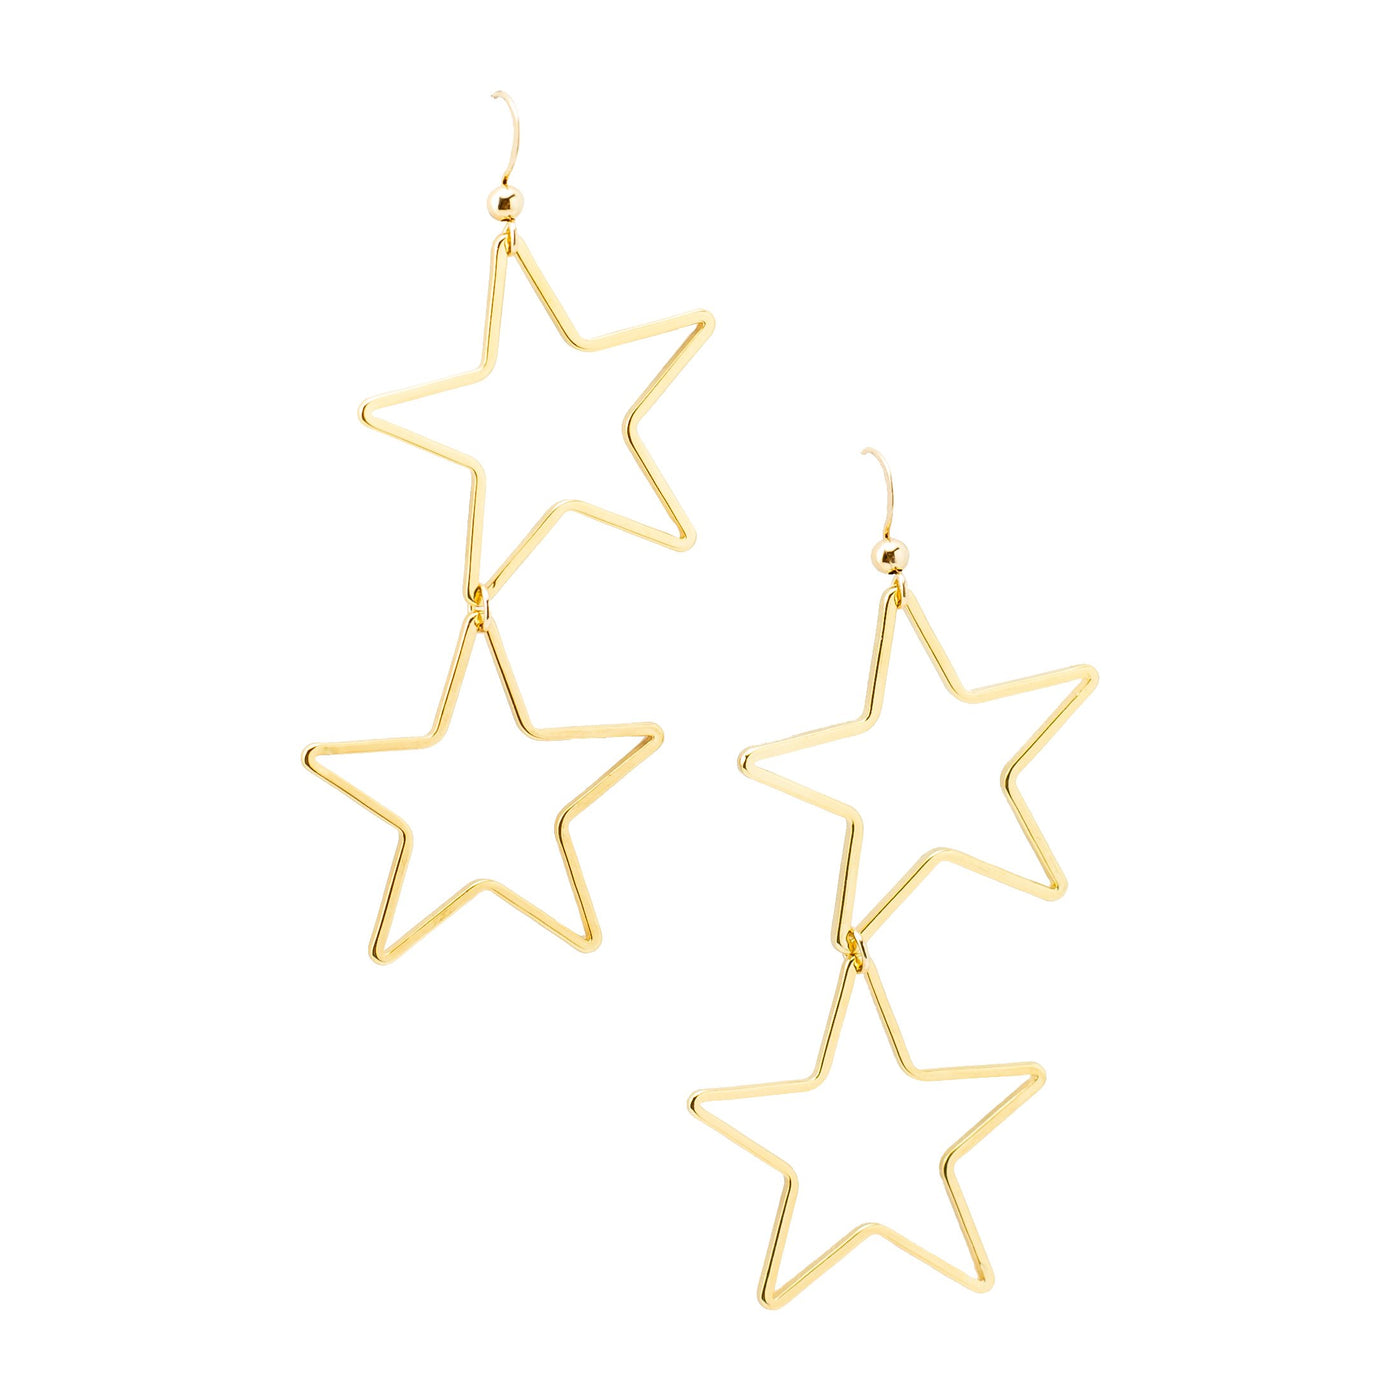 Double Star Earrings - Roses & Chains | Fashionable Clothing, Shoes, Accessories, & More